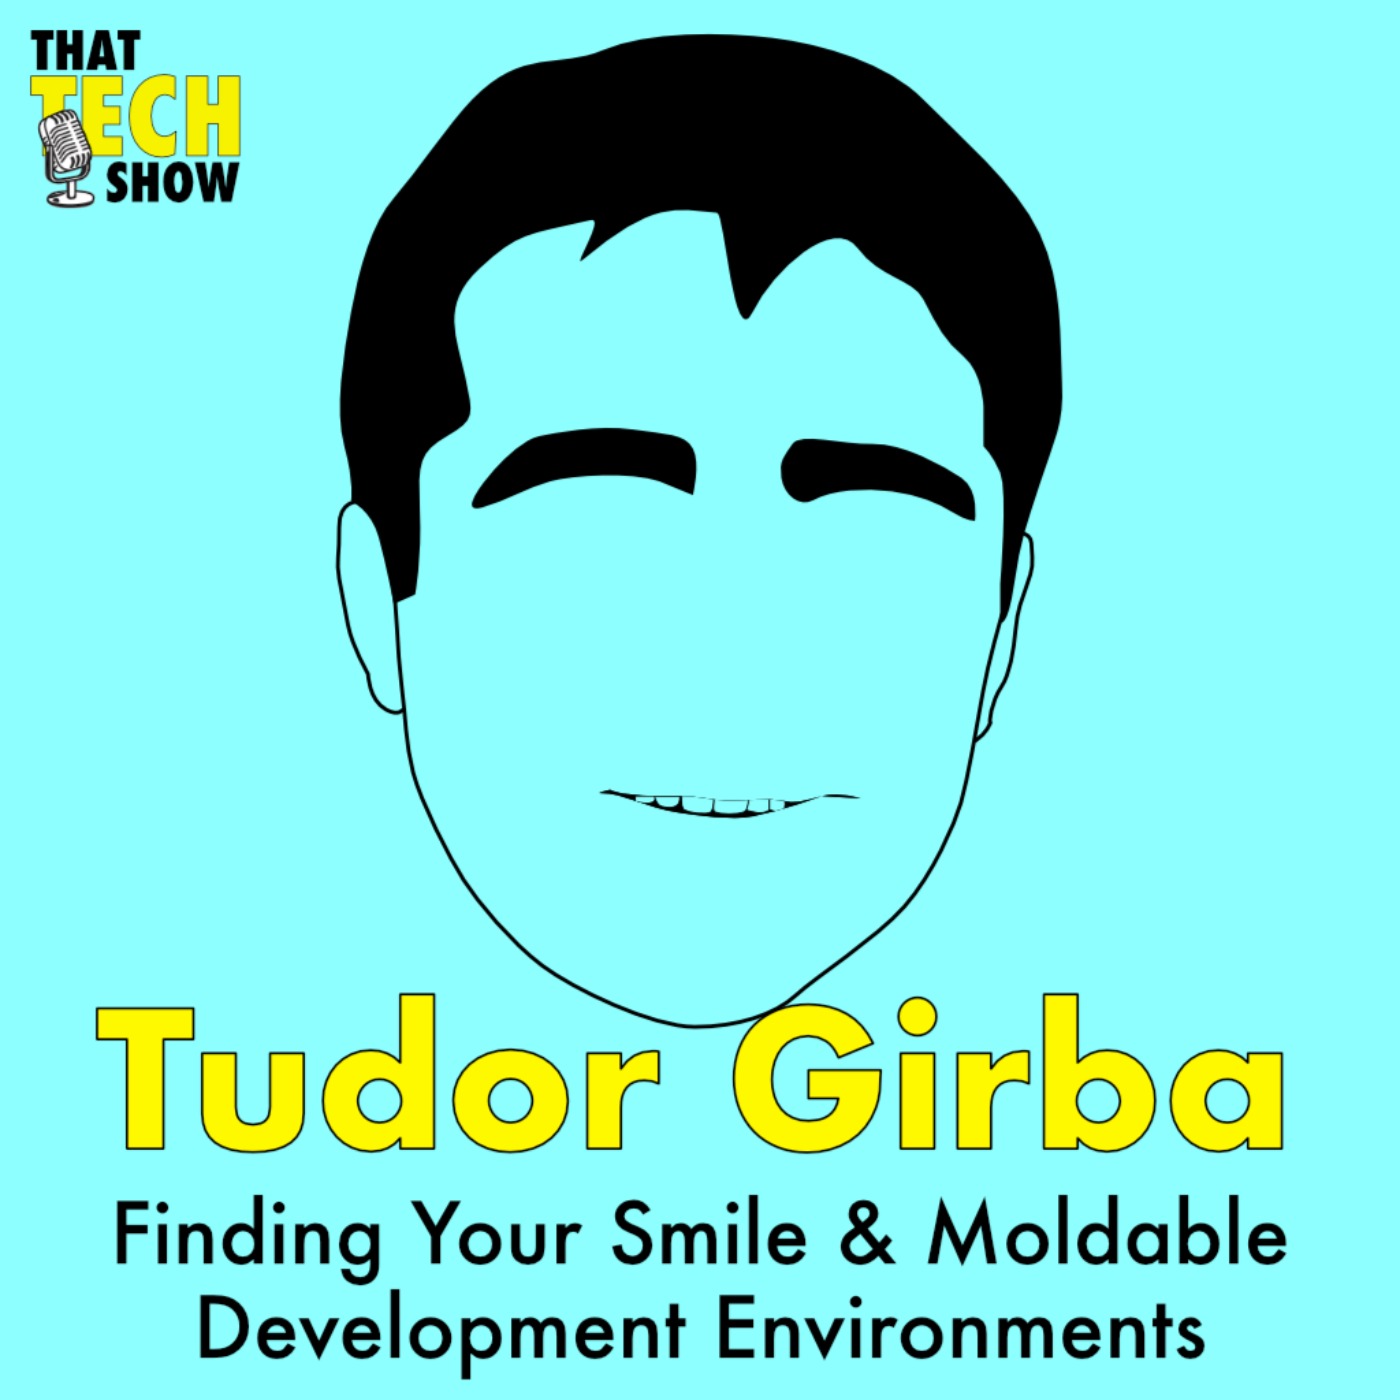 Episode 31 - Finding your Smile & Moldable Development Environments with Tudor Girba